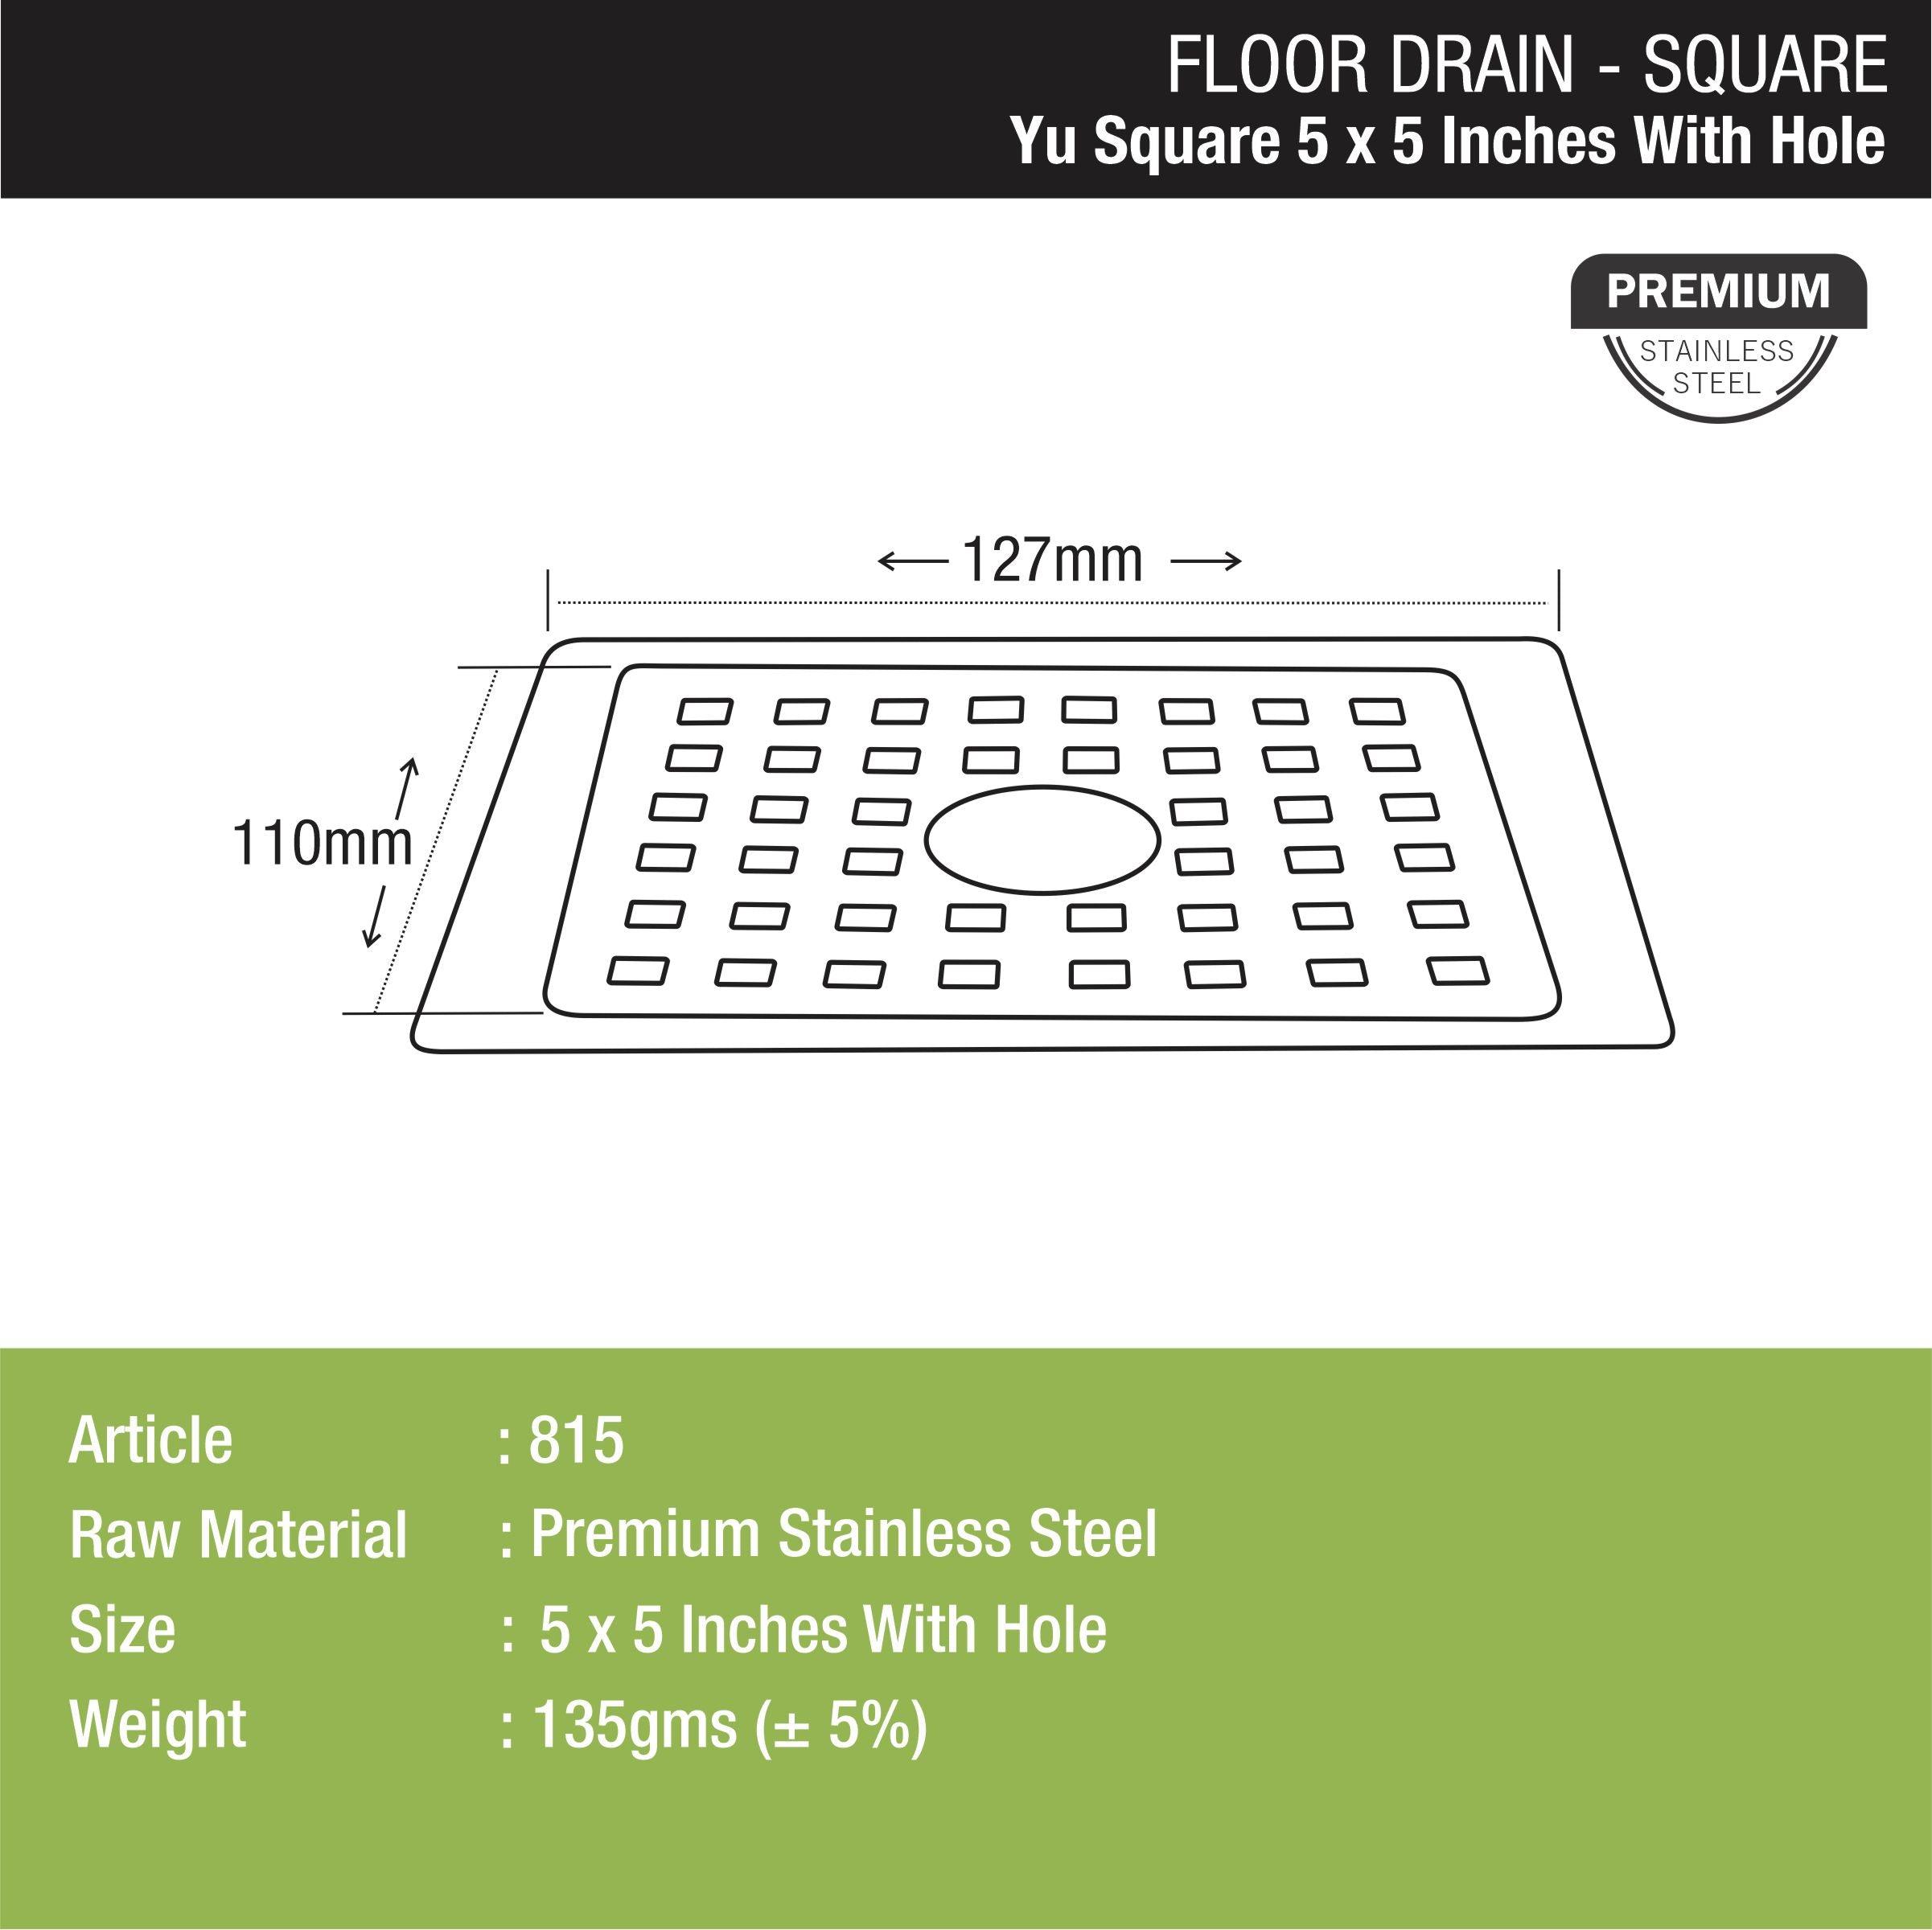 YU Square Floor Drain (5 x 5 Inches) with Hole dimensions and sizes